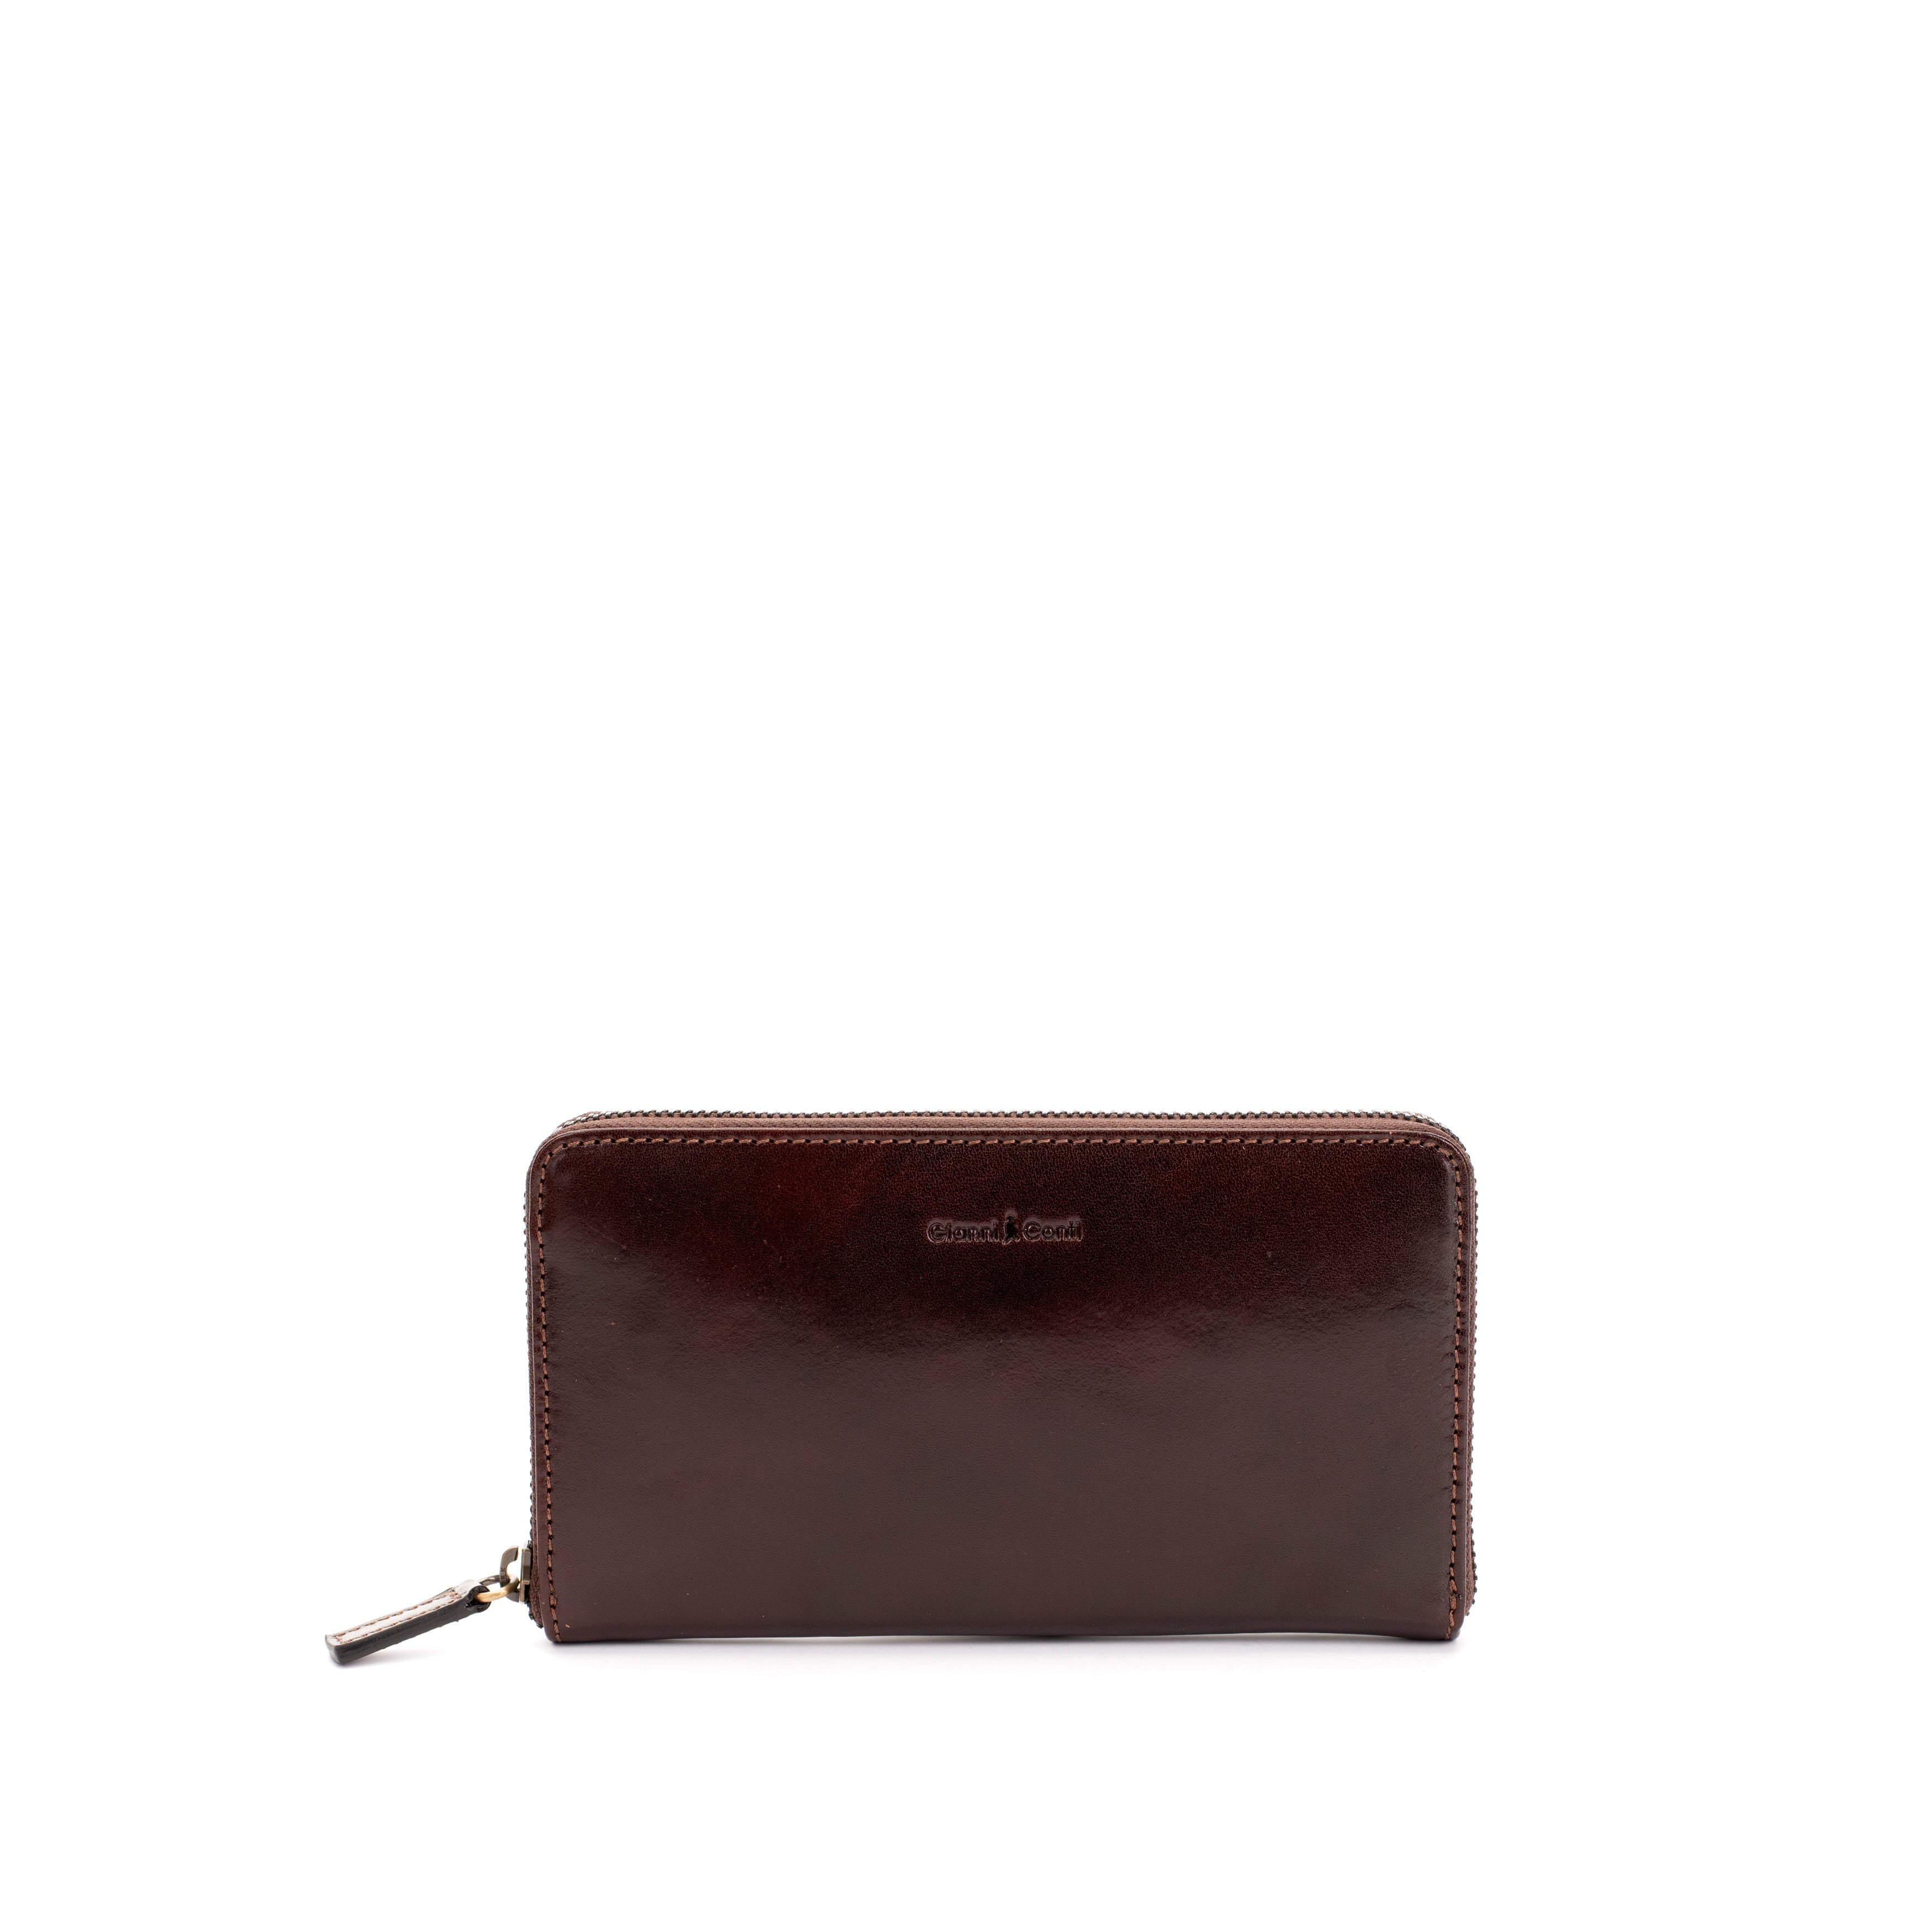 SONIA Veg-Tan Leather Wallet by Gianni Conti